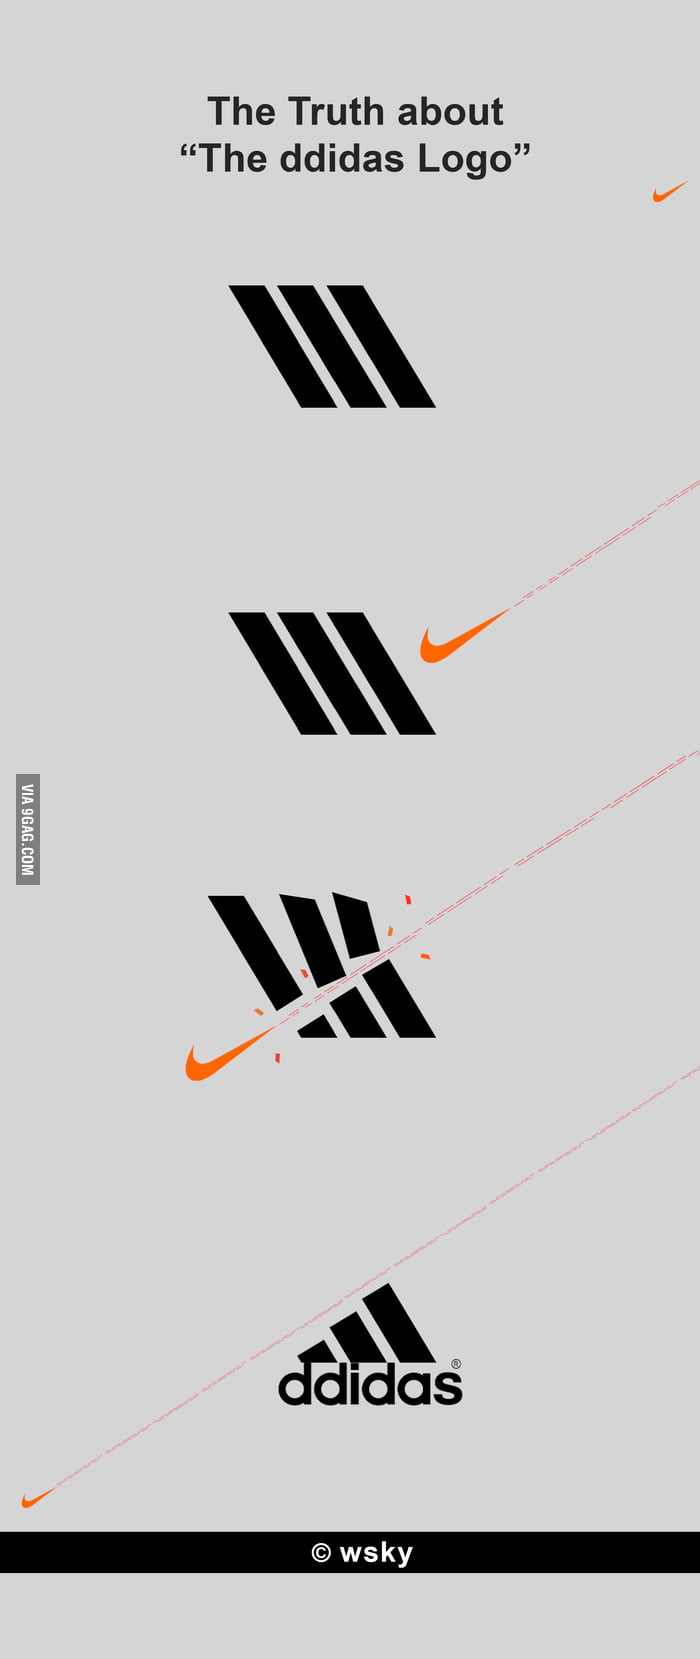 why is adidas better than nike